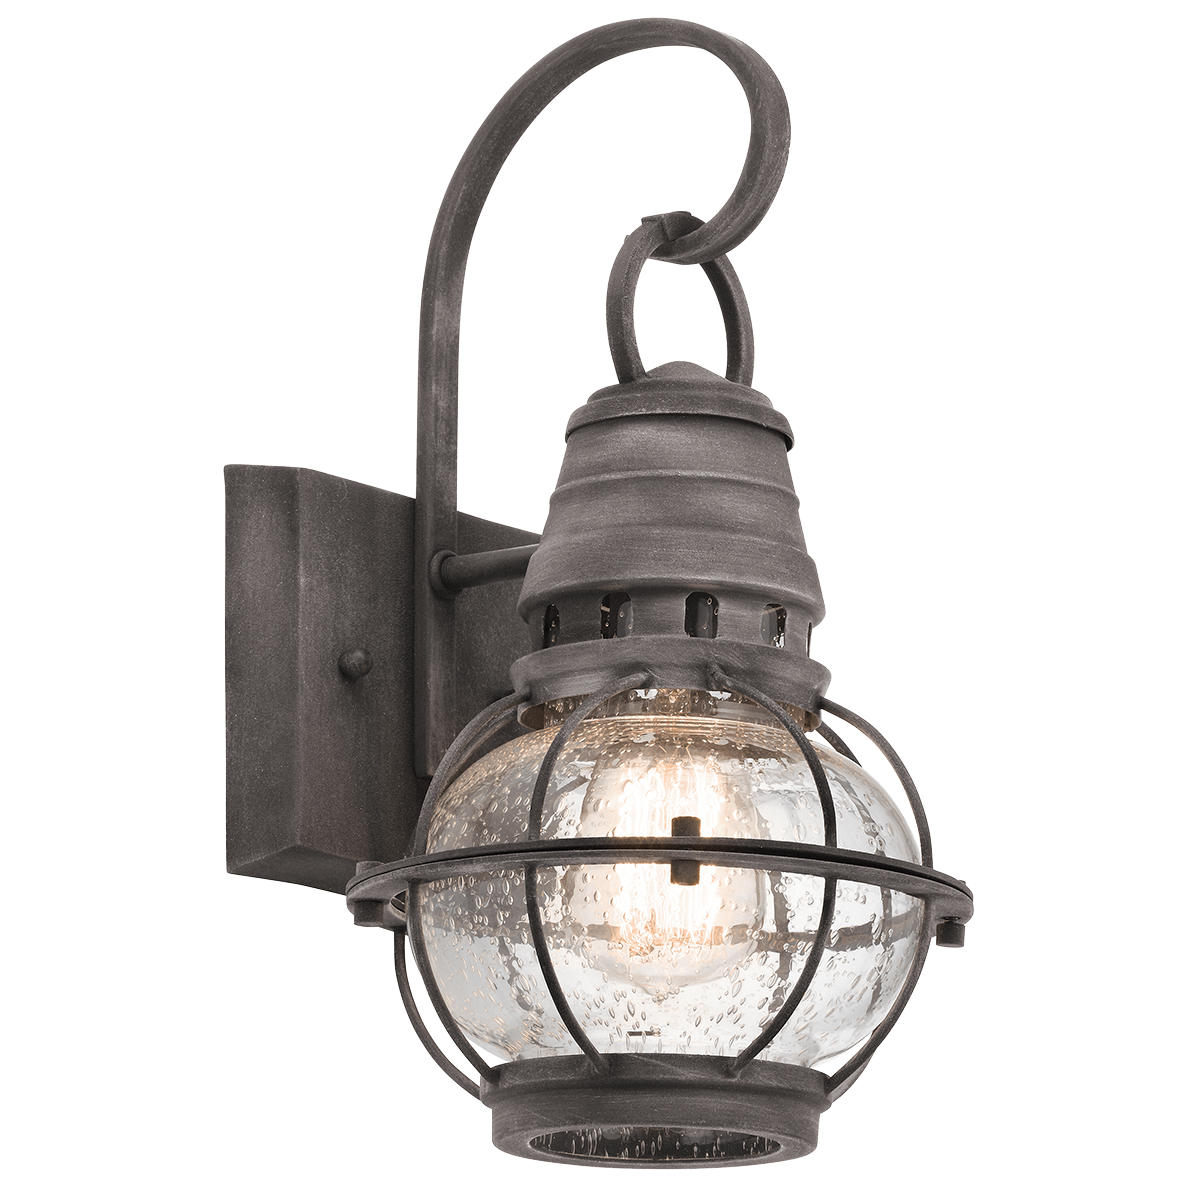 This extra large wall lantern from the Bridge Point outdoor collection embodies the classic styling of nautical and railway lighting.  It features a Weathered Zinc finish surrounding Clear Seeded glass.